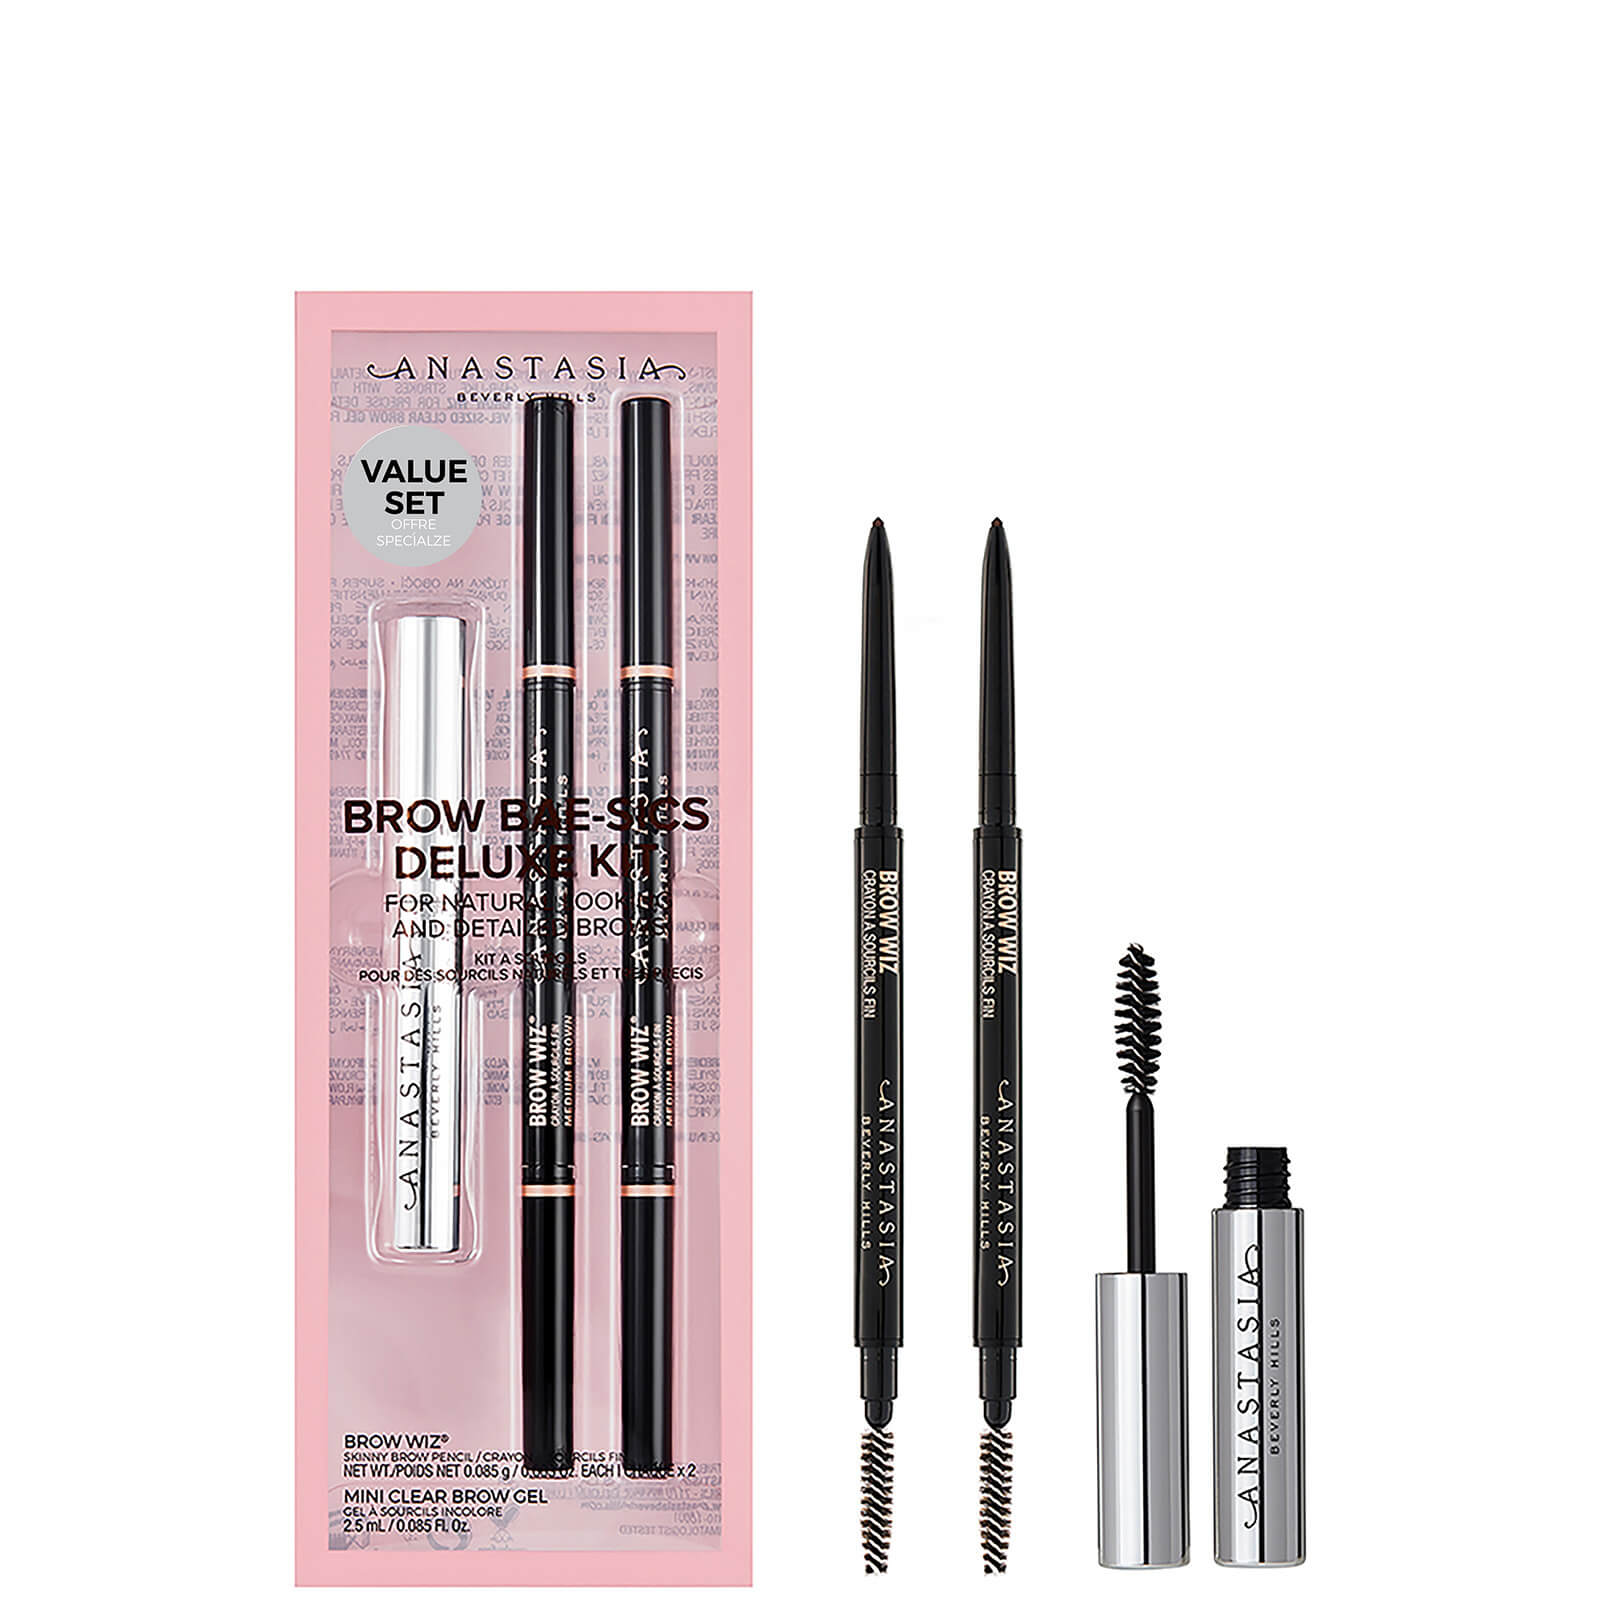 Anastasia Beverly Hills Brow Bae-sics Deluxe Kit (Various Shades) - Soft Brown